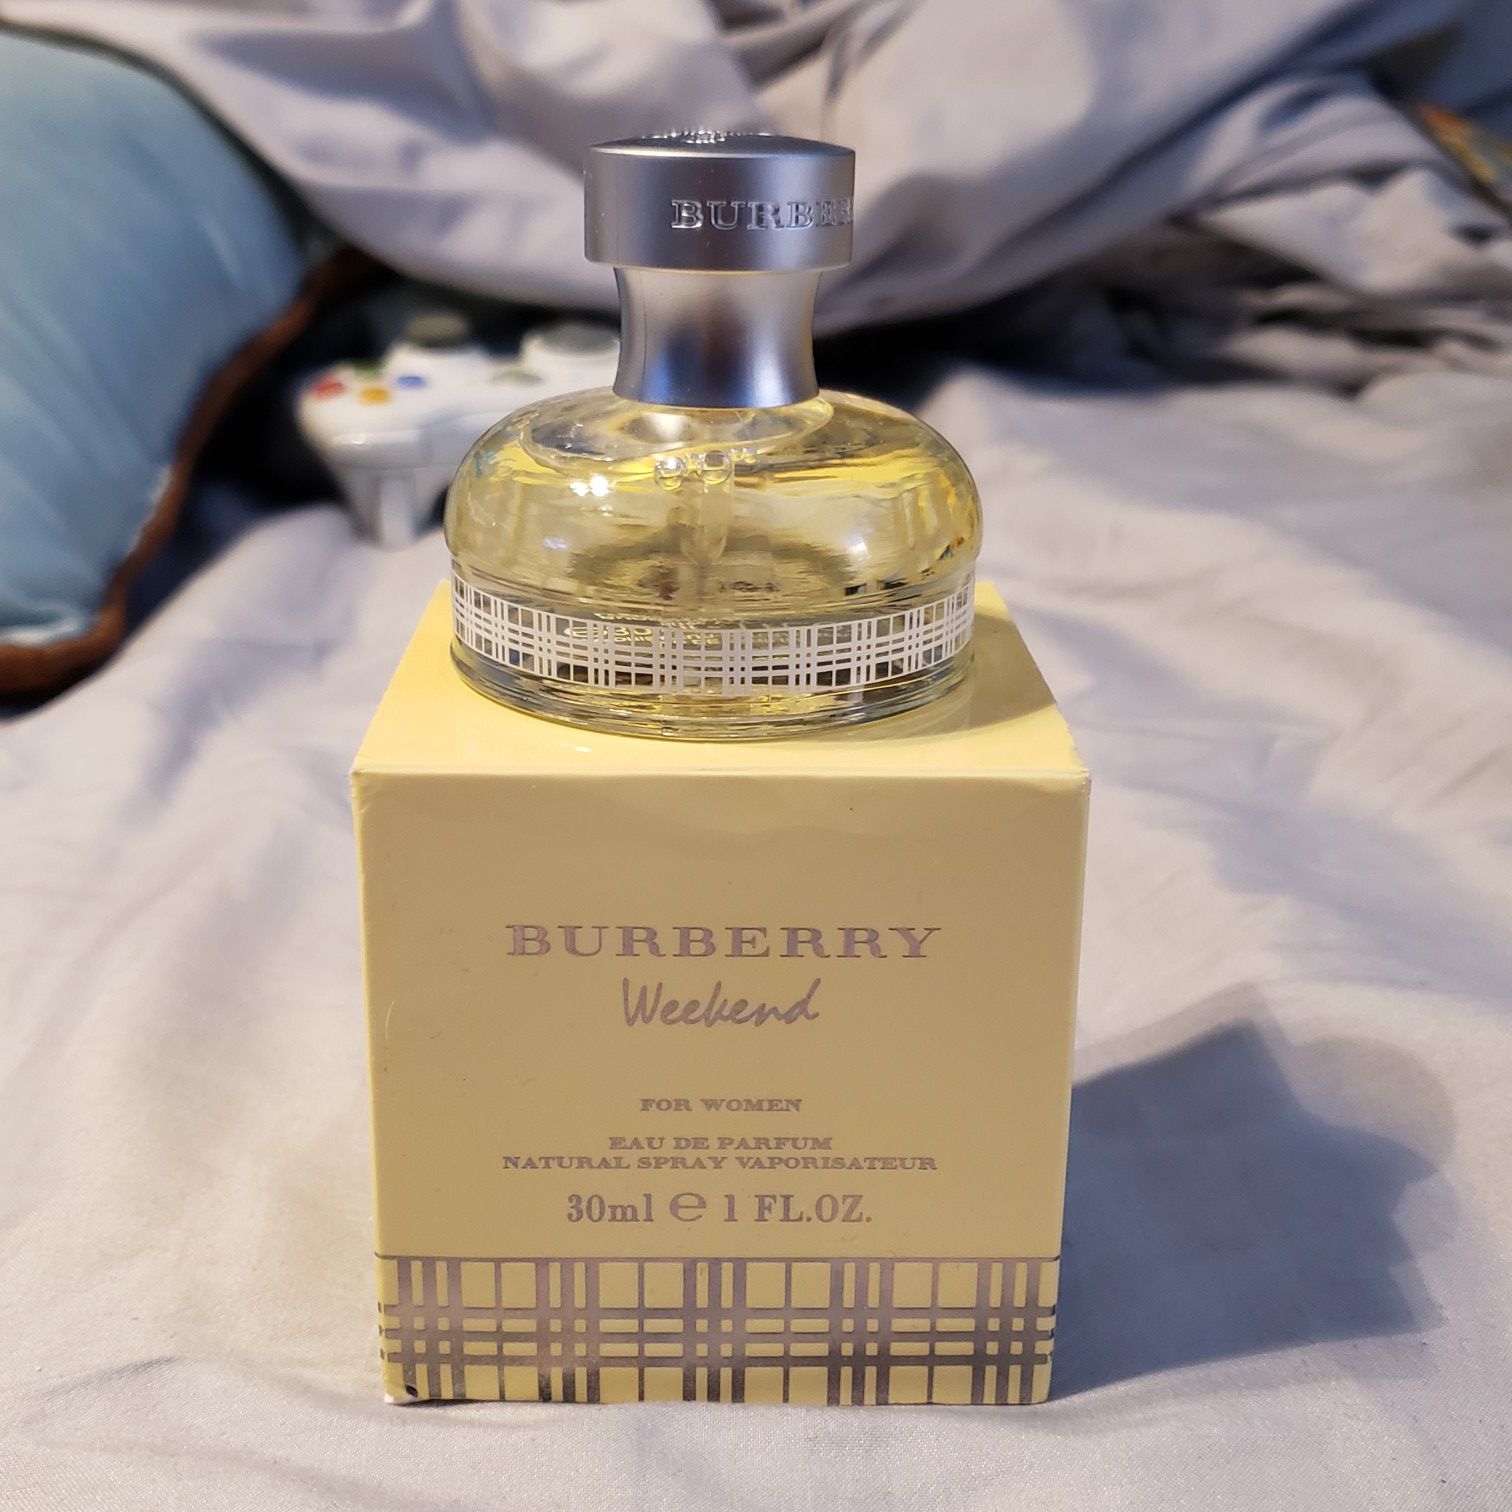 Burberry Weekend Perfume Perfect Gift For Mothers Day $48 Value